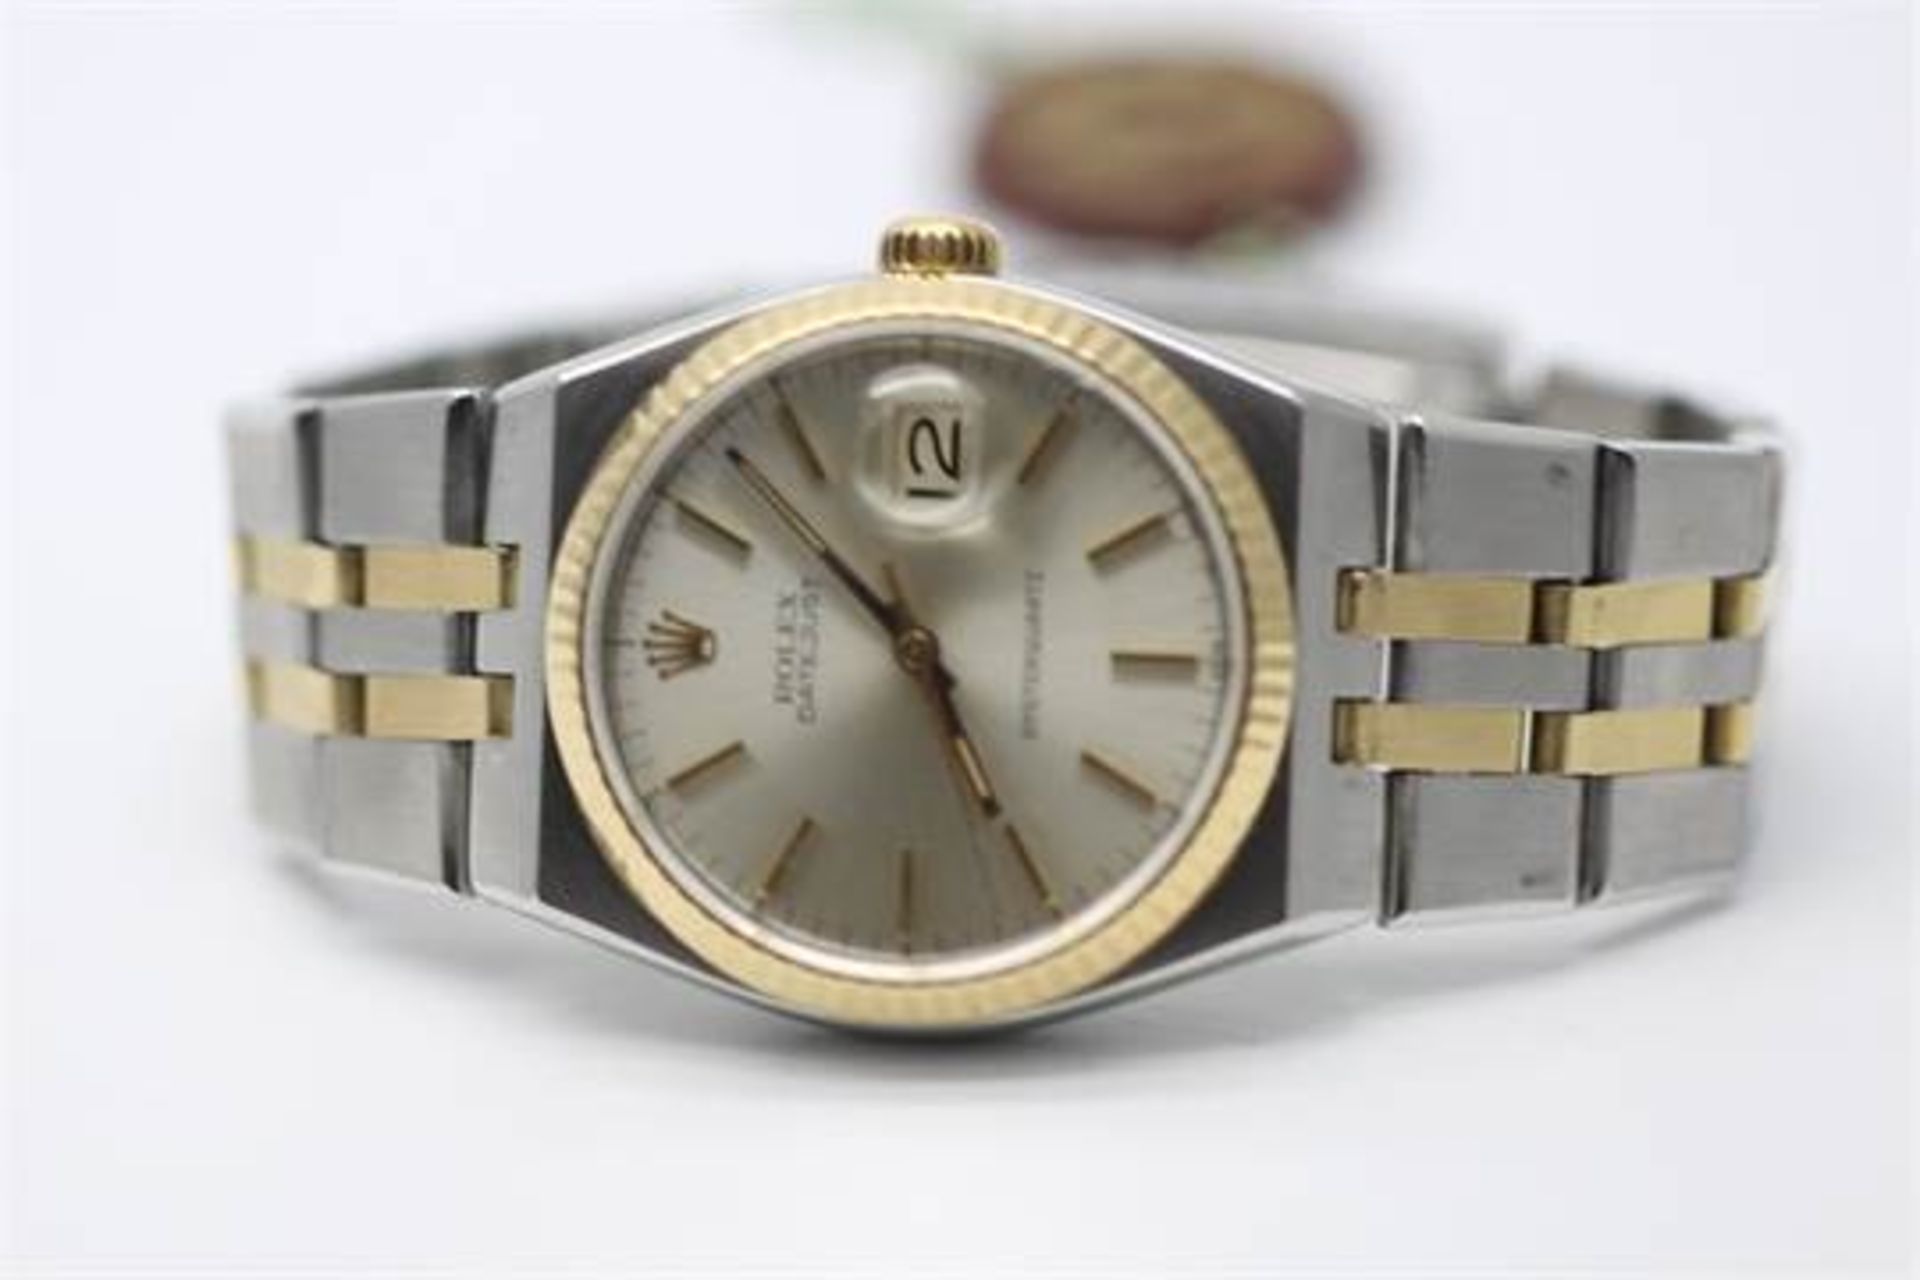 VINTAGE ROLEX OYSTER QUARTZ, STAINLESS STEEL AND 18CT YELLOW GOLD, 36MM, CHAMPAYNE BATON DIAL,